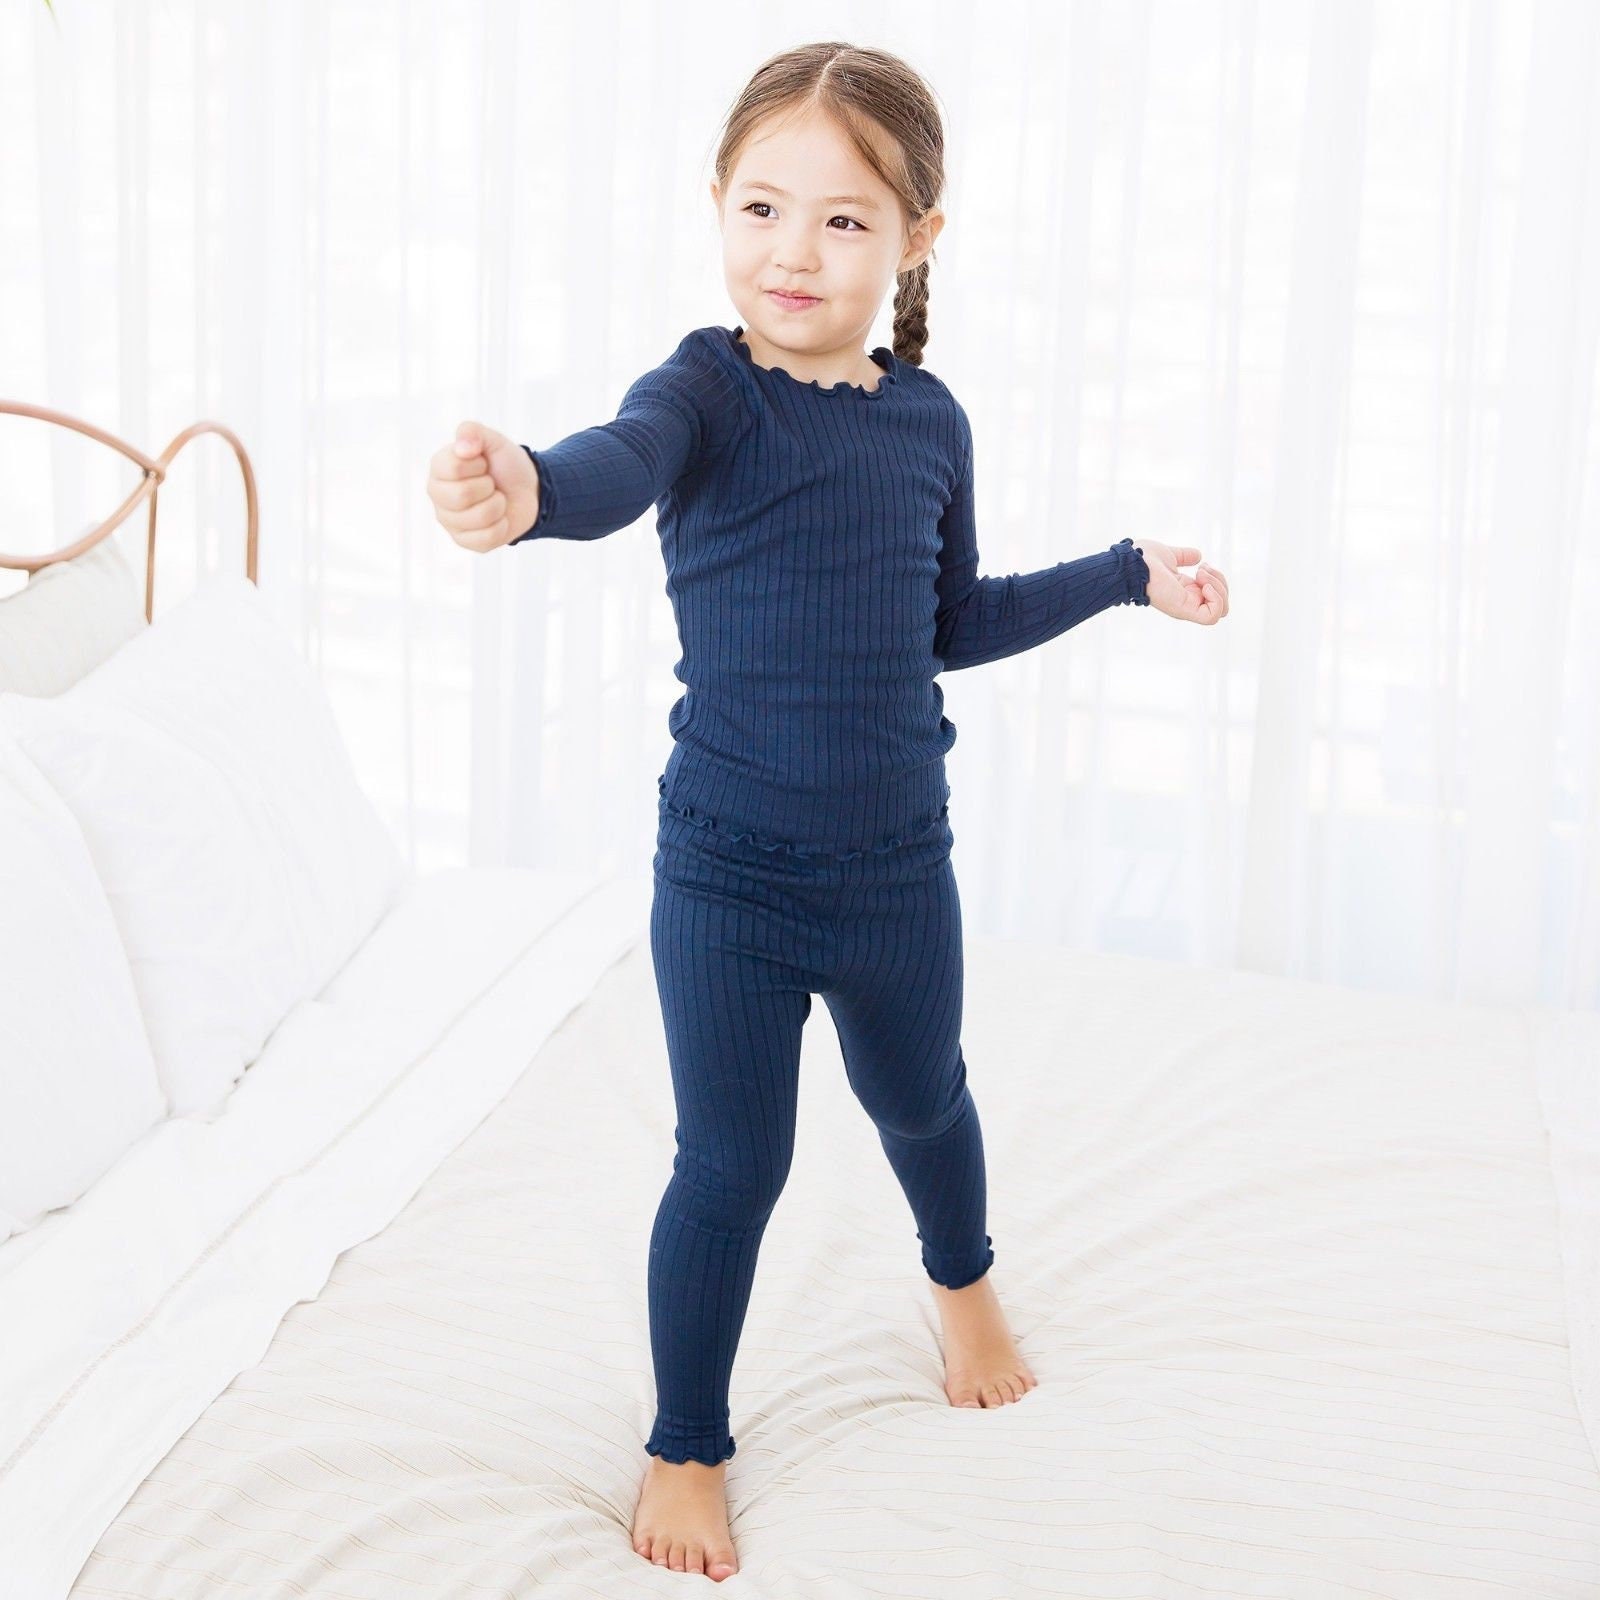 New Arrivals Modal Cloud Baby, Toddler and Kids Tencel Pajama Sets sky,  Navy, Brown, Grey, Latte, Pink, Indi Pink 